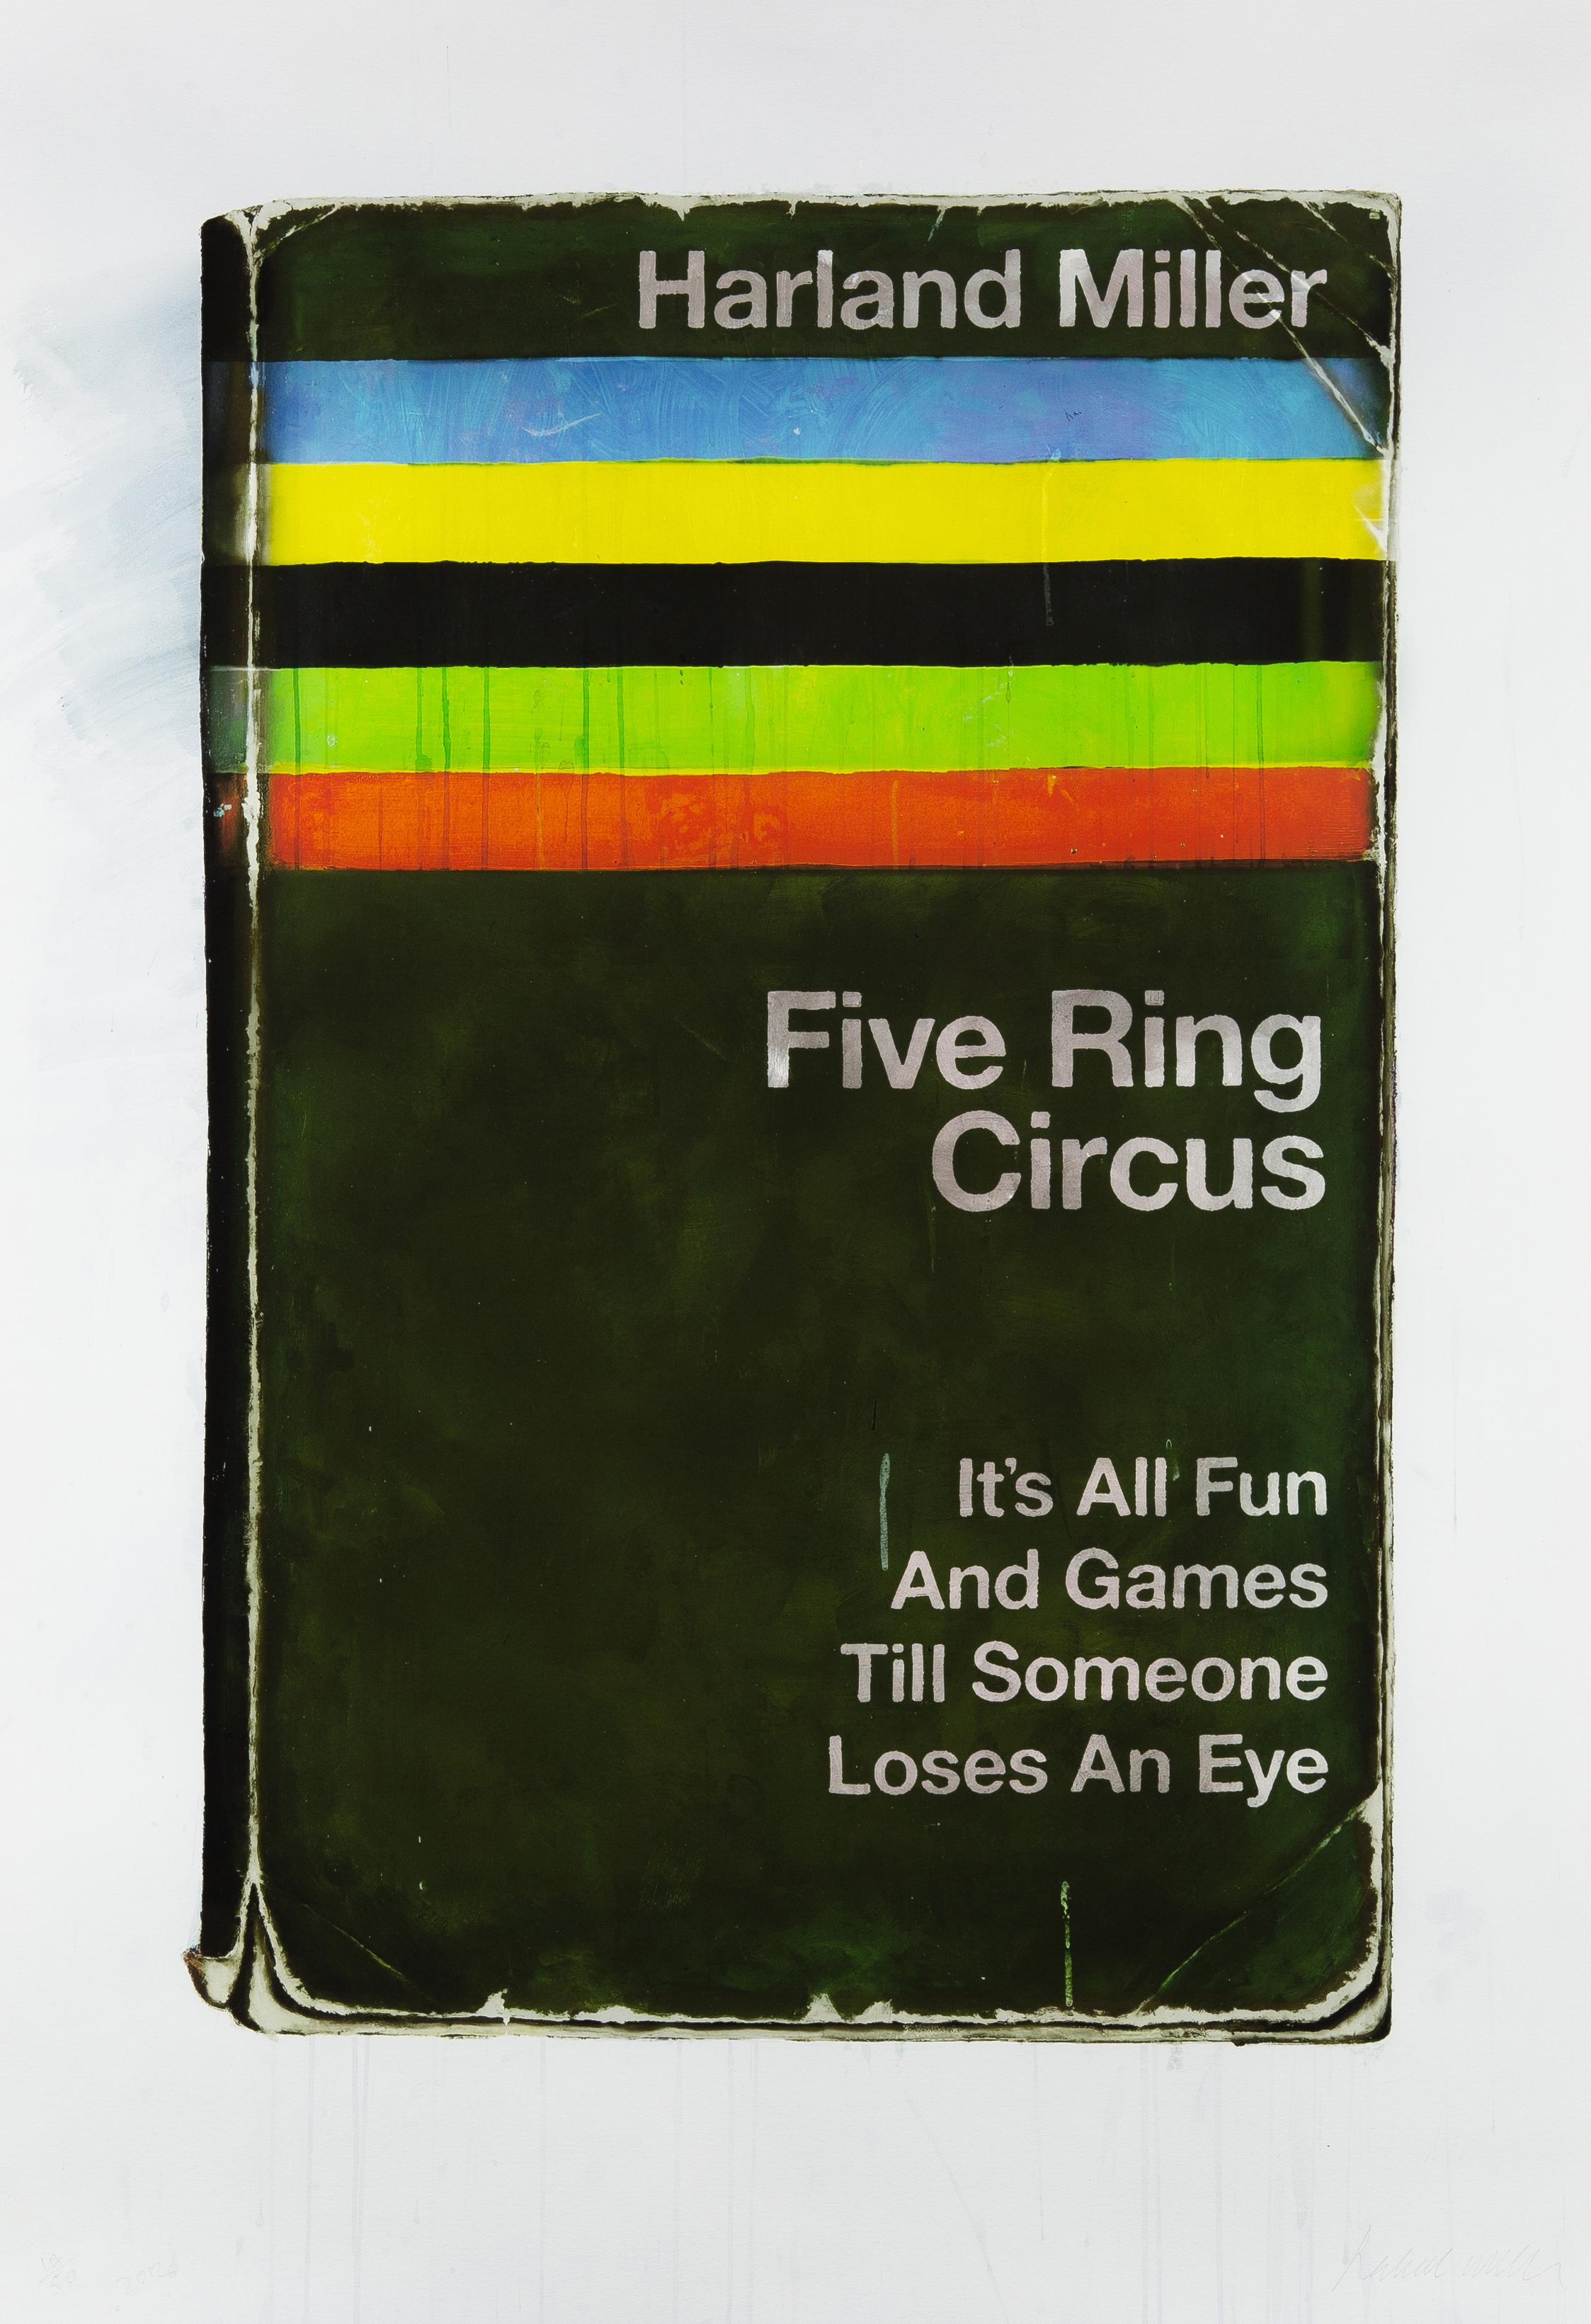 Five Ring Circus-It's All Fun and Games Till Someone Loses an Eye - Print by Harland Miller